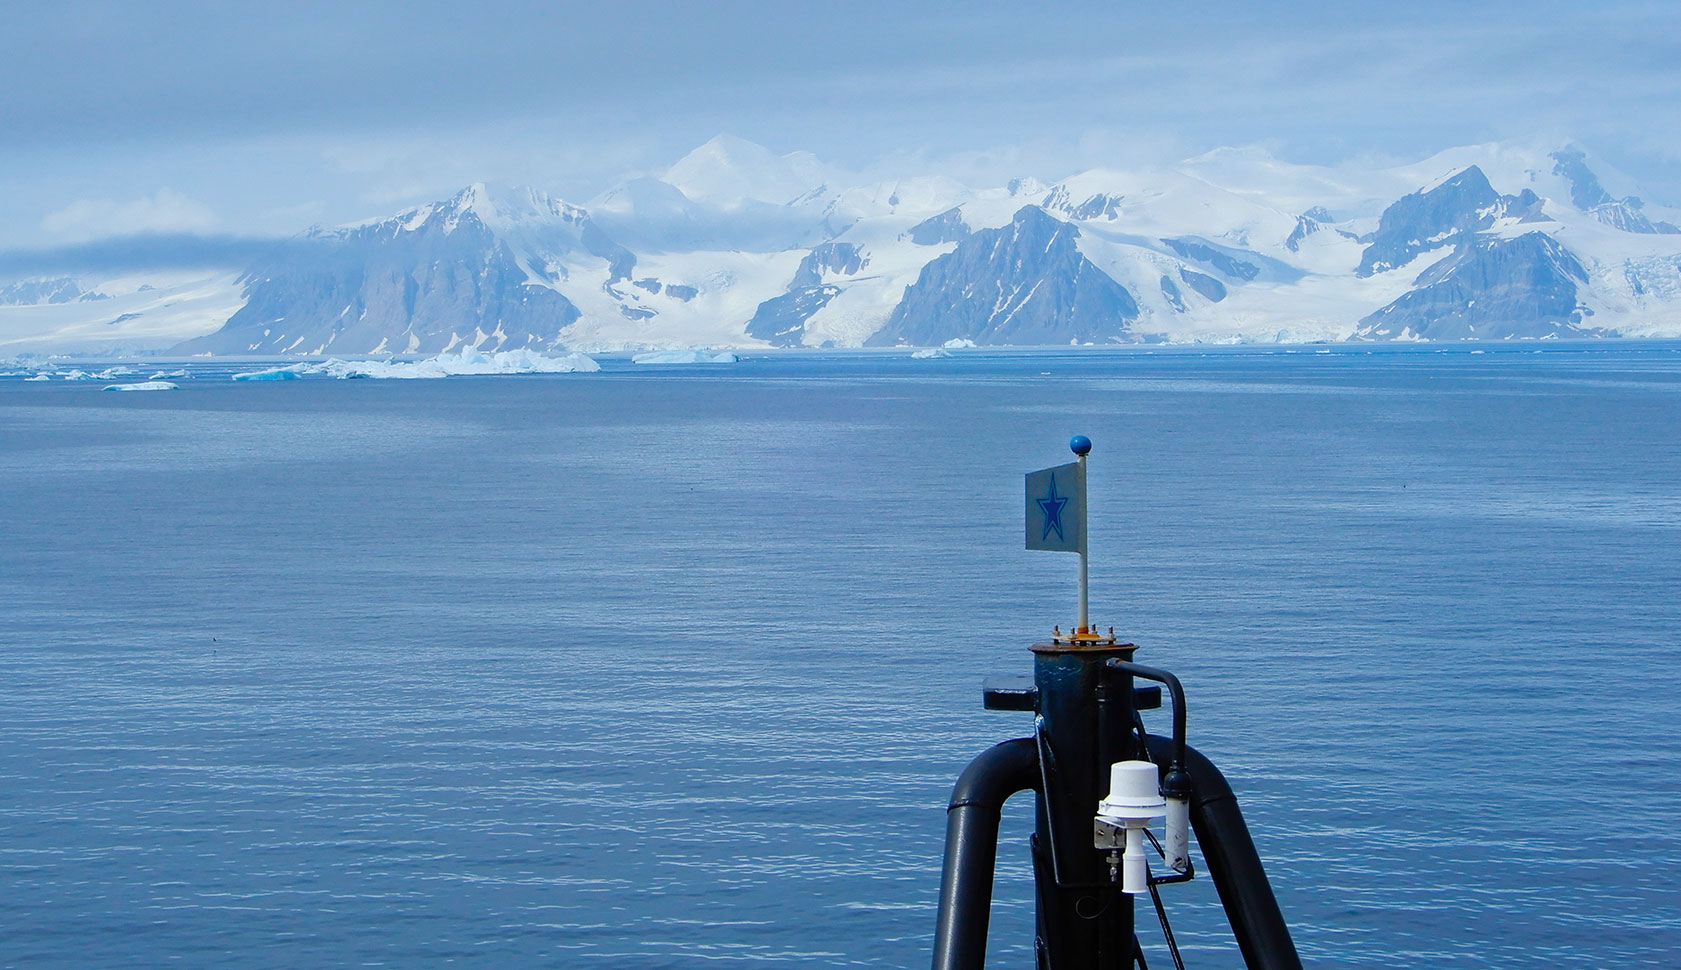 view from ship off shore of Antarctica